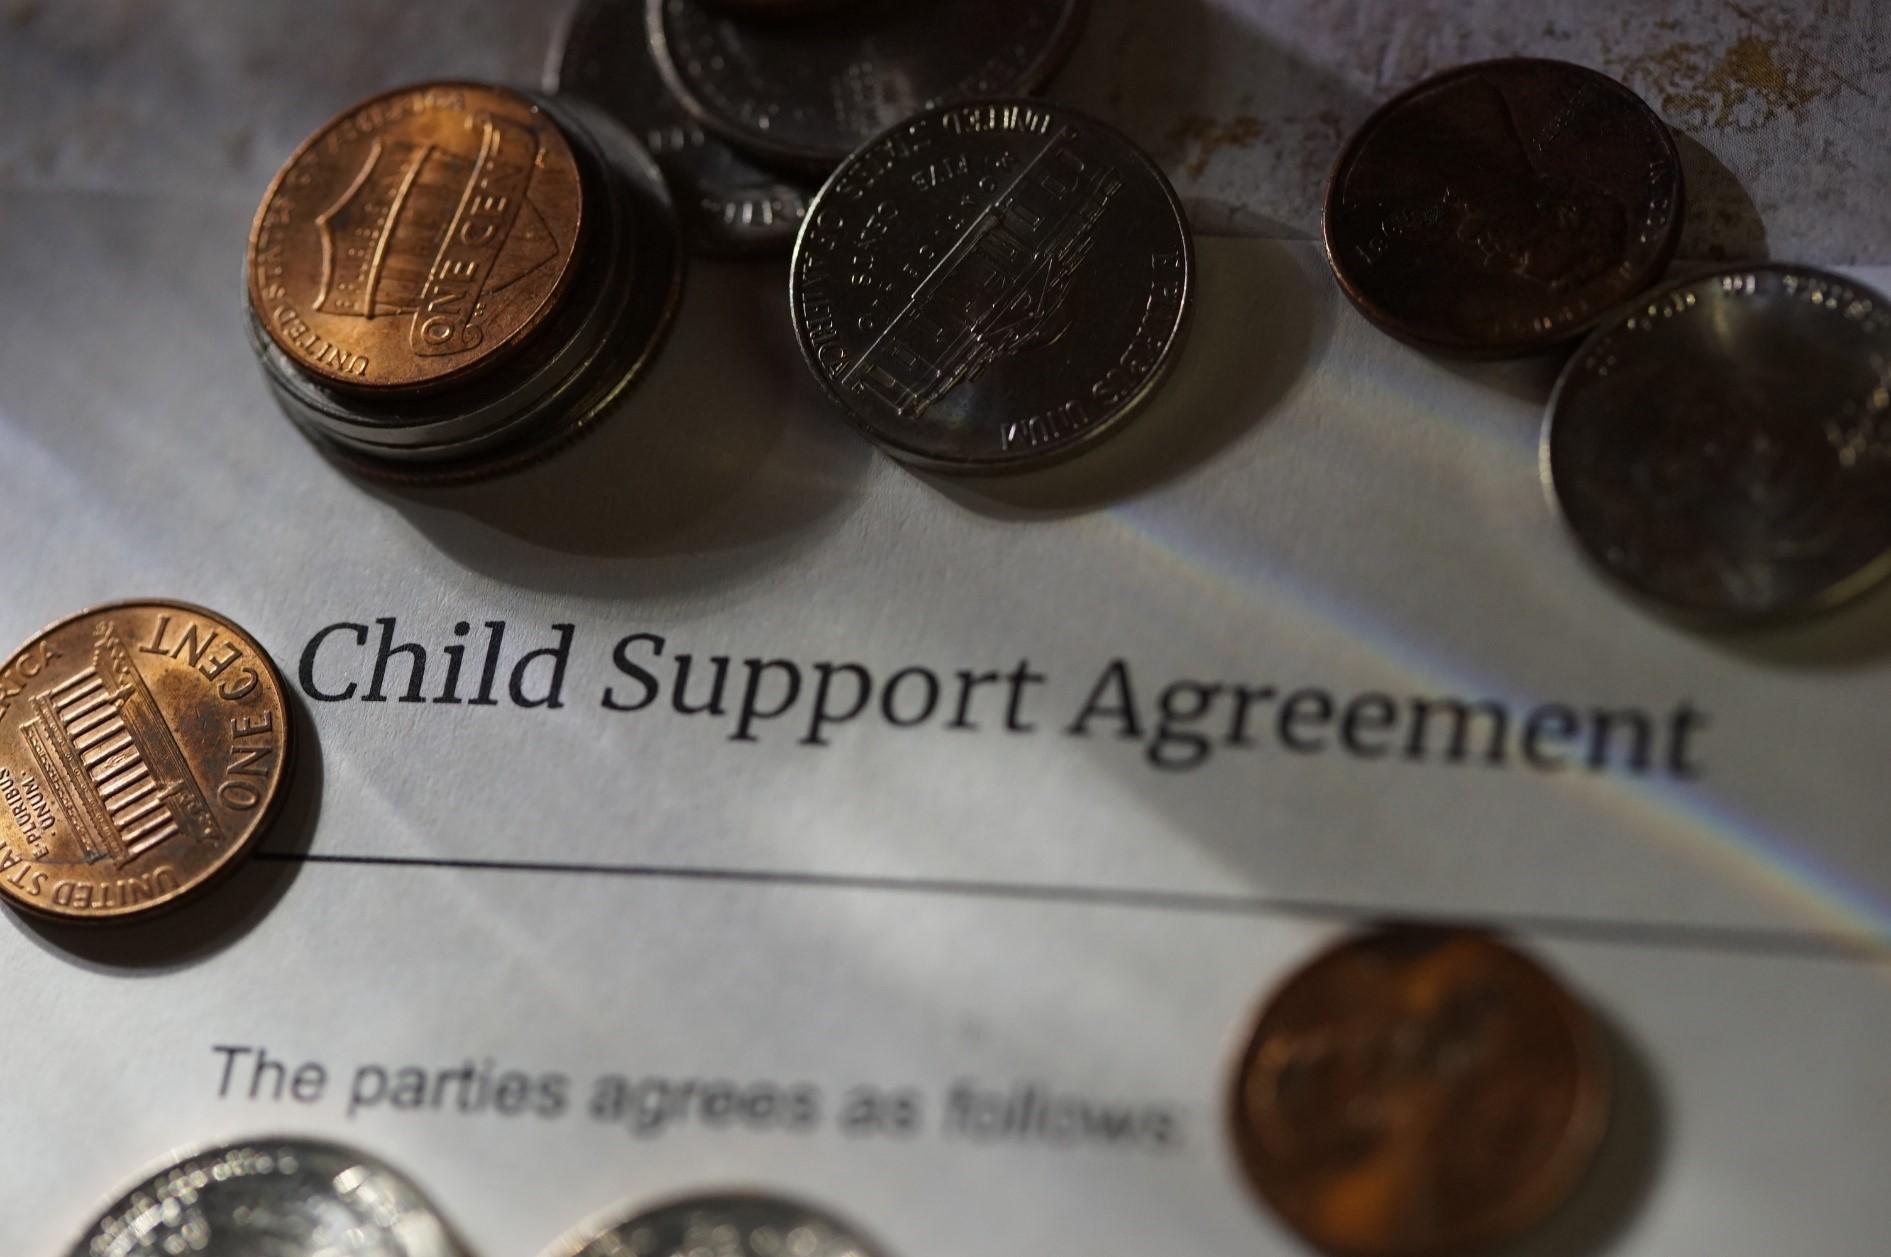 Child Support Agreement Form | When Is Child Support Considered Late